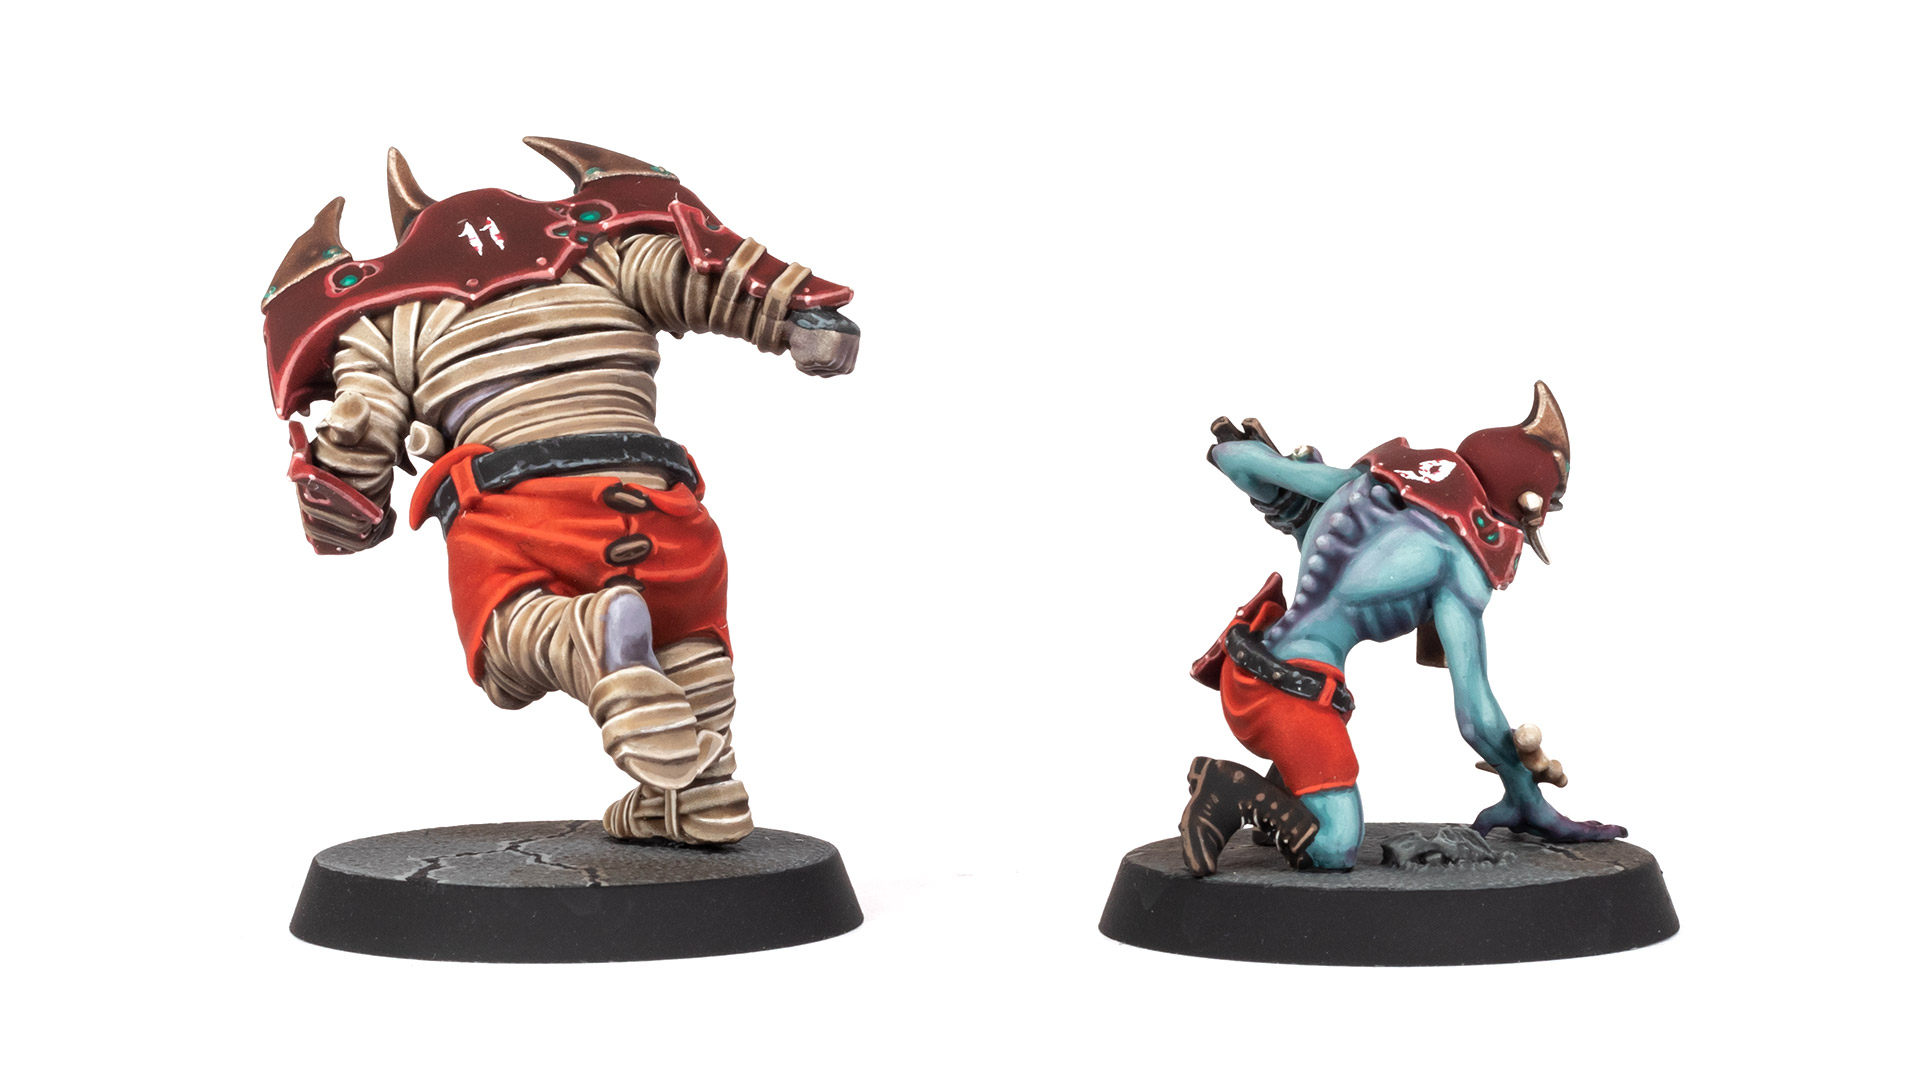 Back view of a Shambling Undead Mummy and Ghoul from Blood Bowl, painted by Stahly